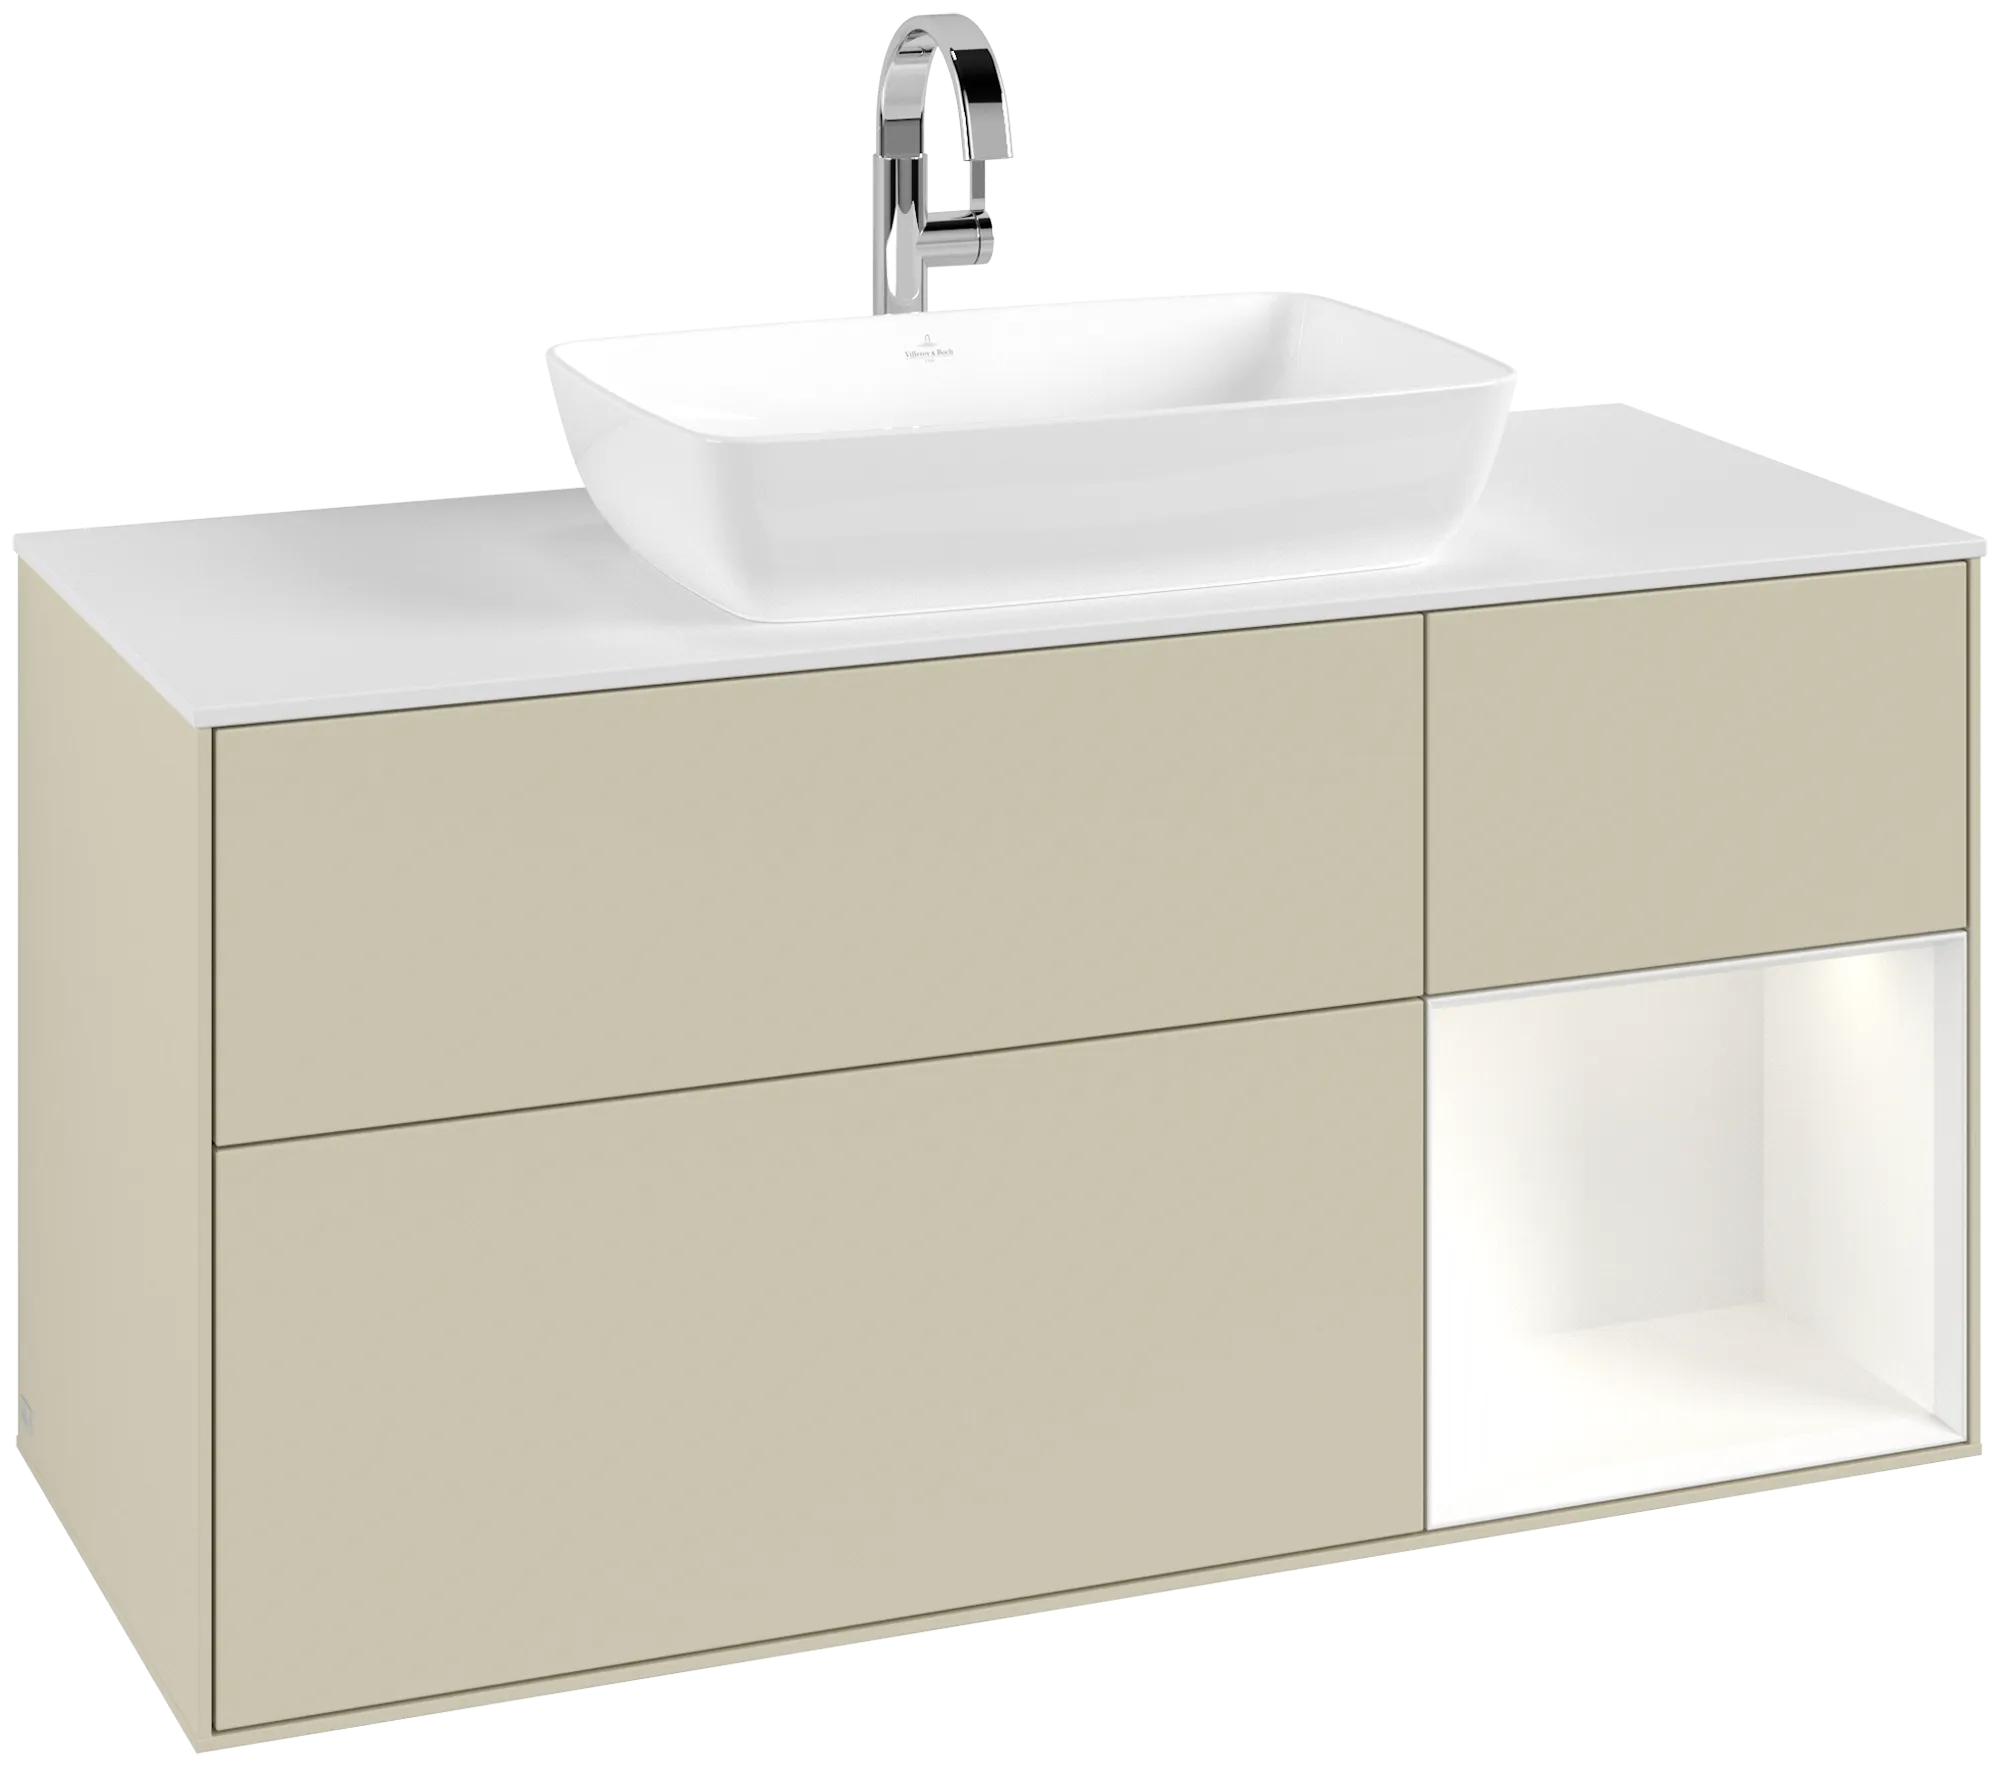 Obrázek VILLEROY BOCH Finion Vanity unit, with lighting, 3 pull-out compartments, 1200 x 603 x 501 mm, Silk Grey Matt Lacquer / White Matt Lacquer / Glass White Matt #G831MTHJ